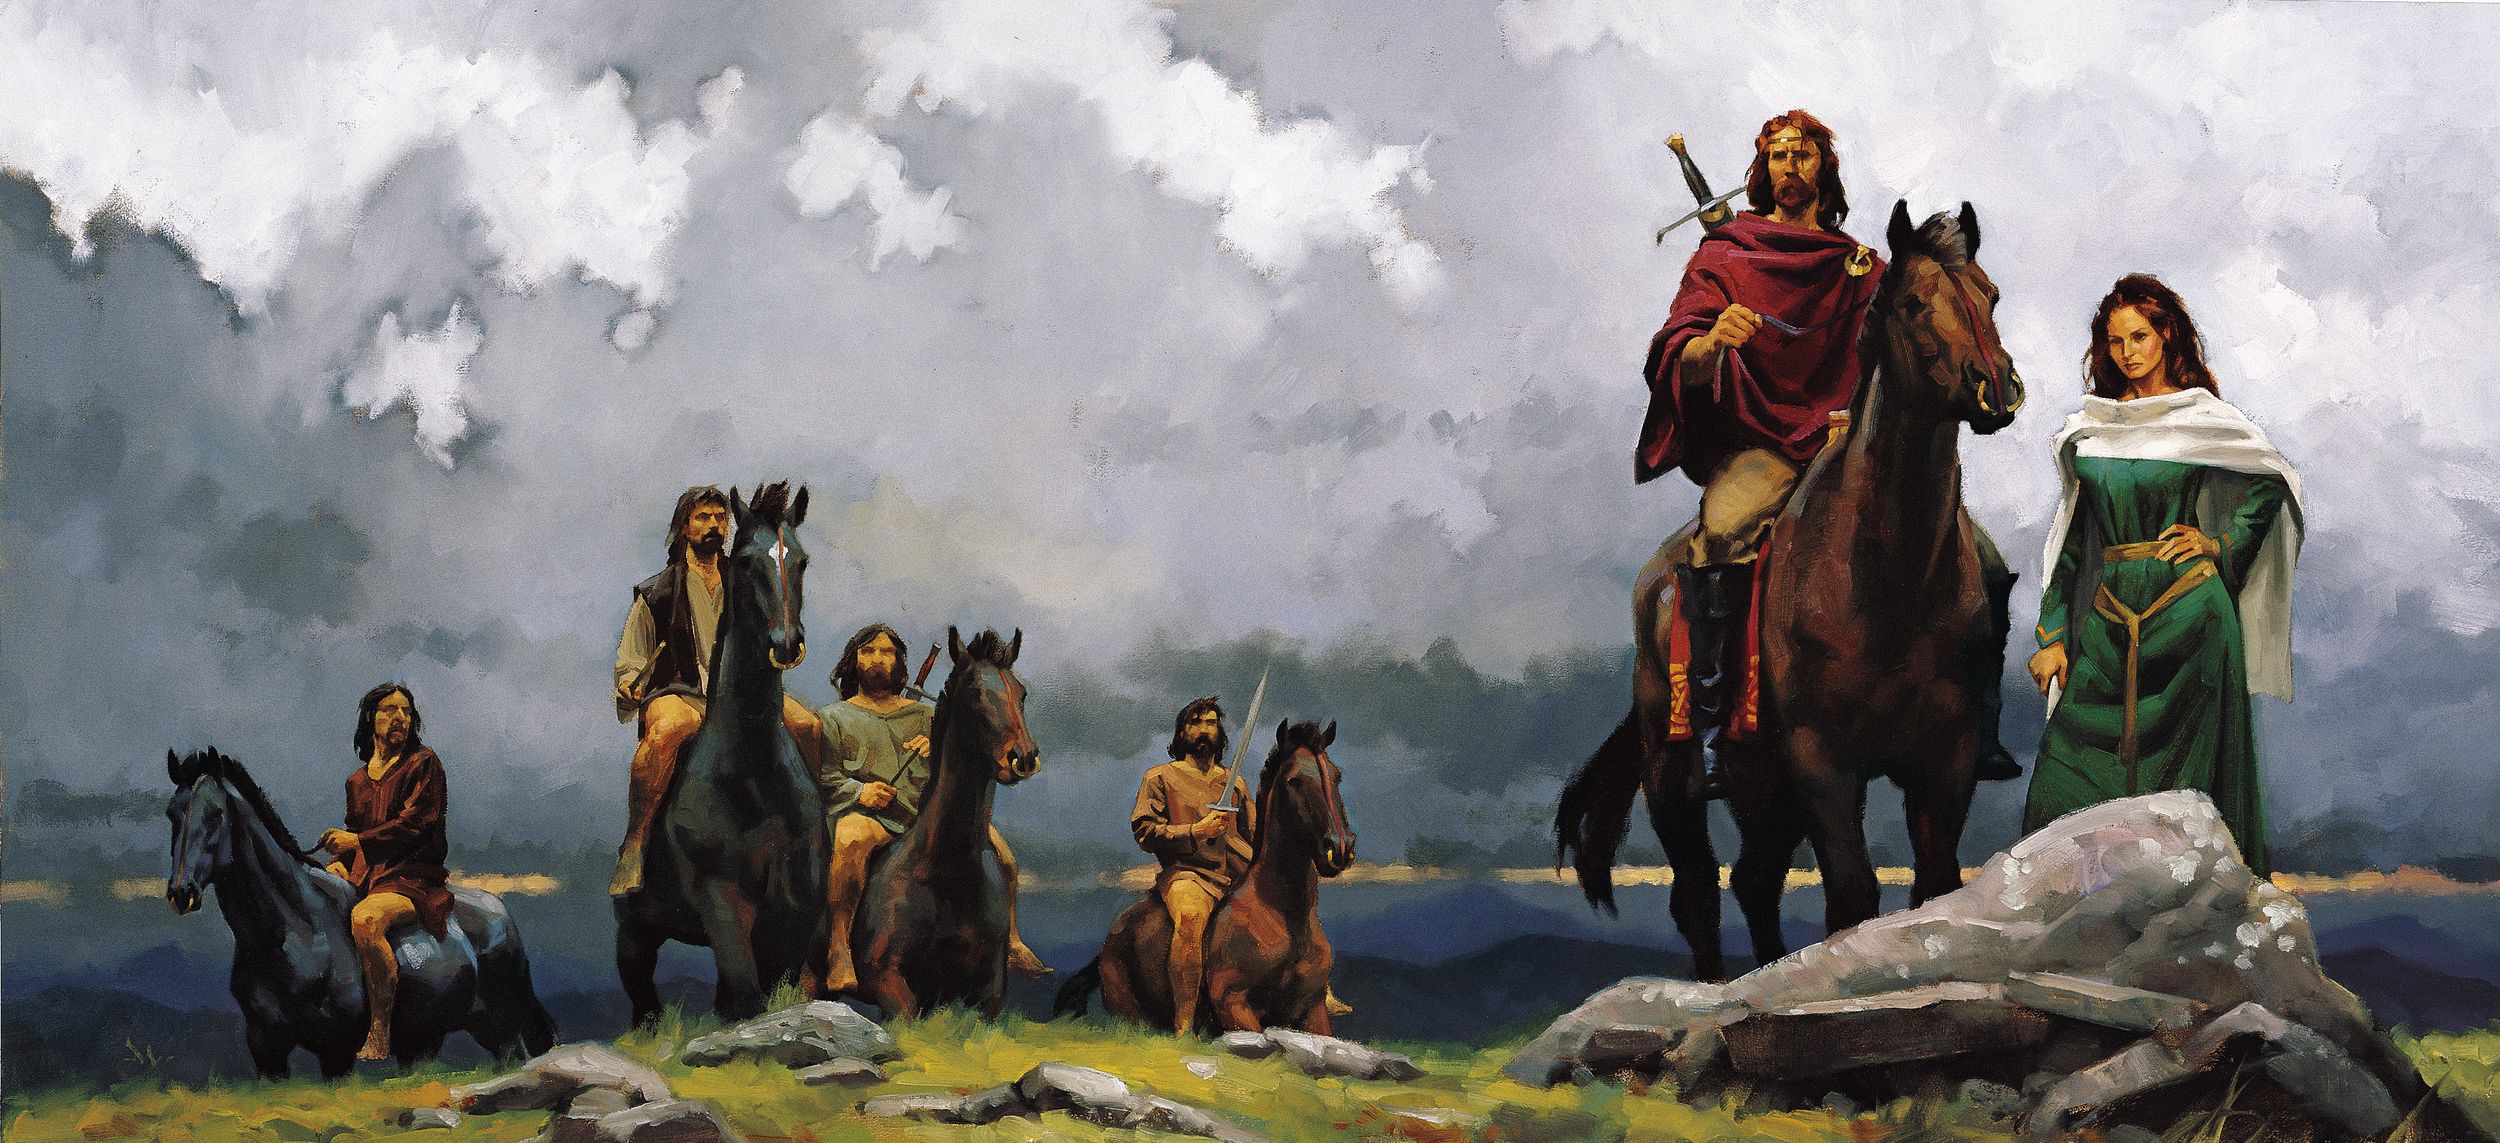 With one of his four wives at his side, King Brian Boru prepares to lead his men into battle in Gregory Manchess’s contemporary painting, Lion of Ireland.